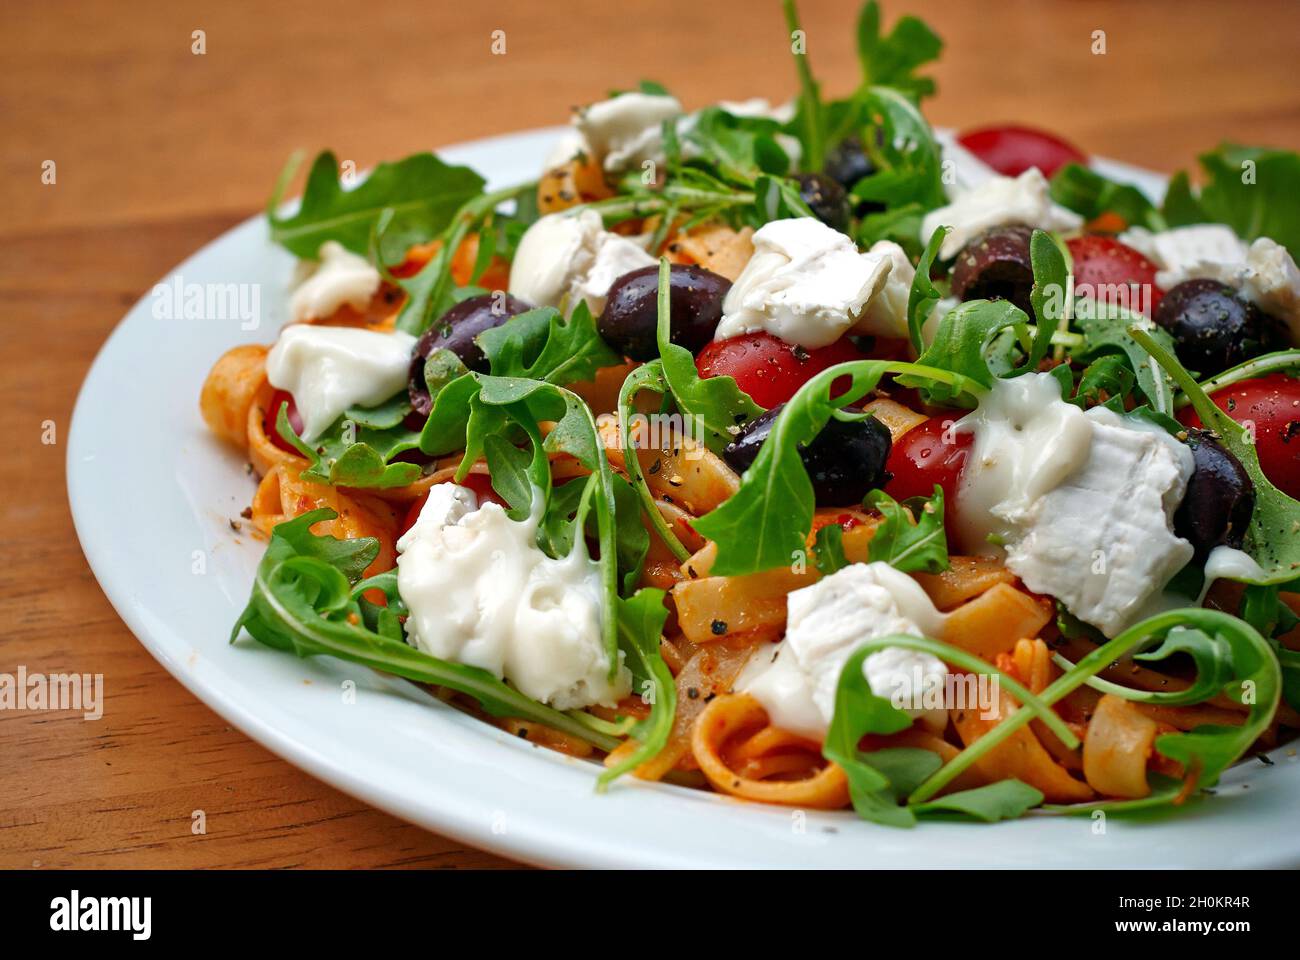 Tagliatelle pasta dish with olives, tomatoes, goat cheese and rocket leaves. Stock Photo